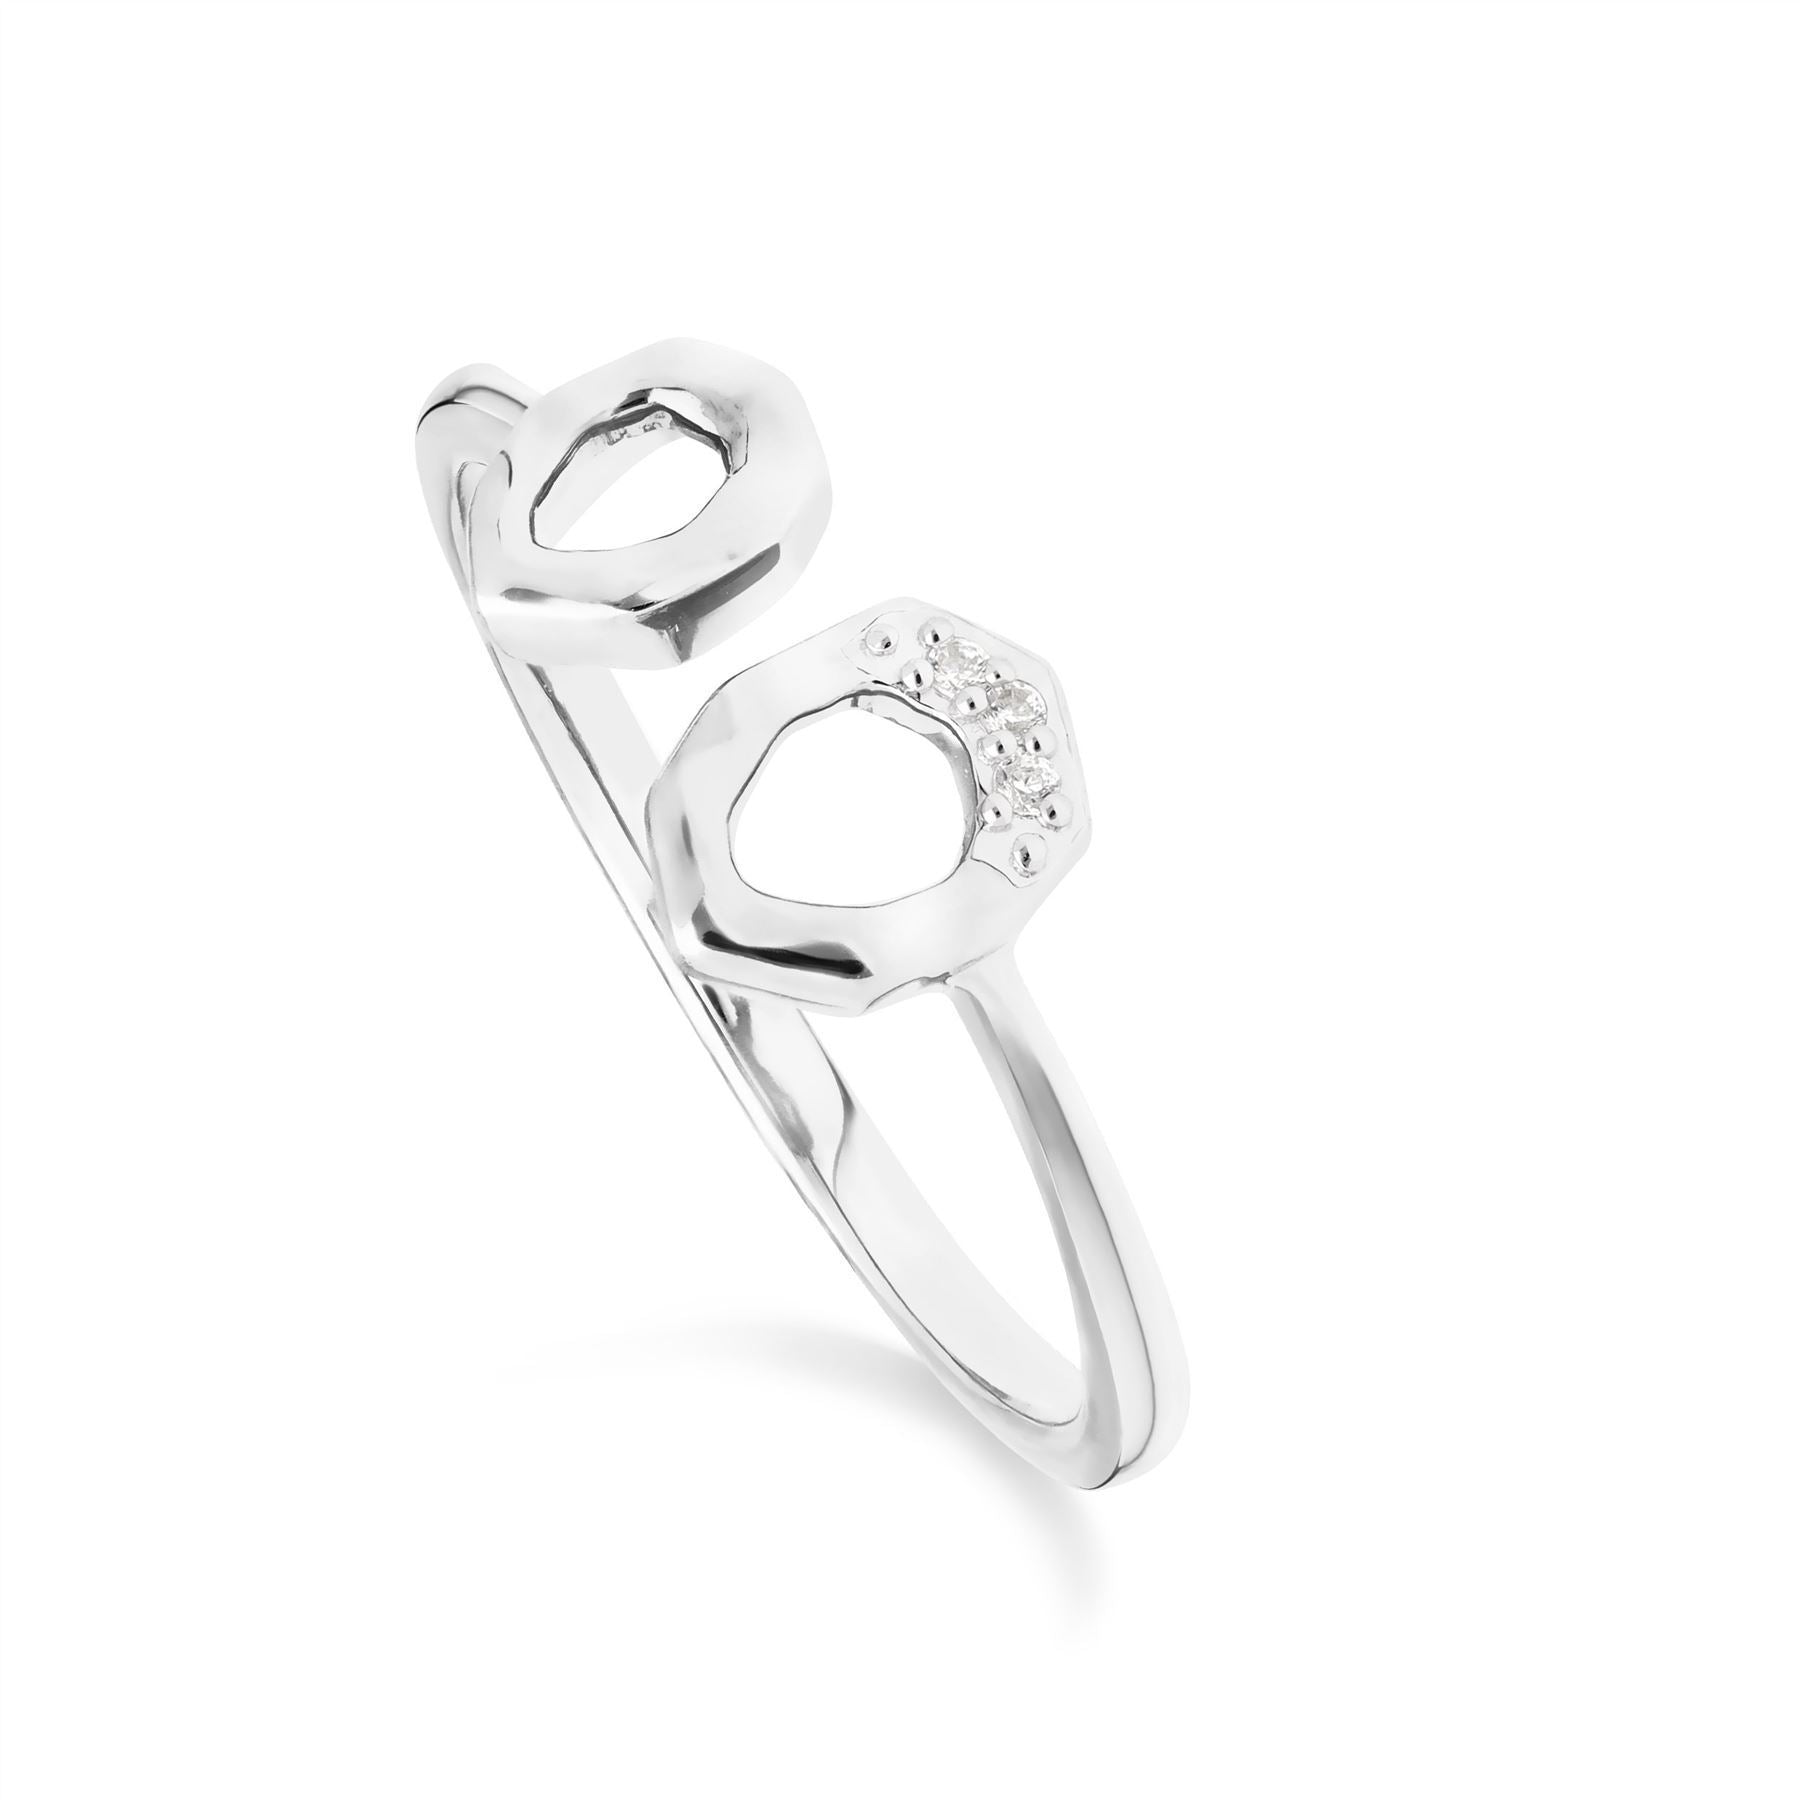 Diamond Pave Asymmetrical Ring in 9ct White Gold